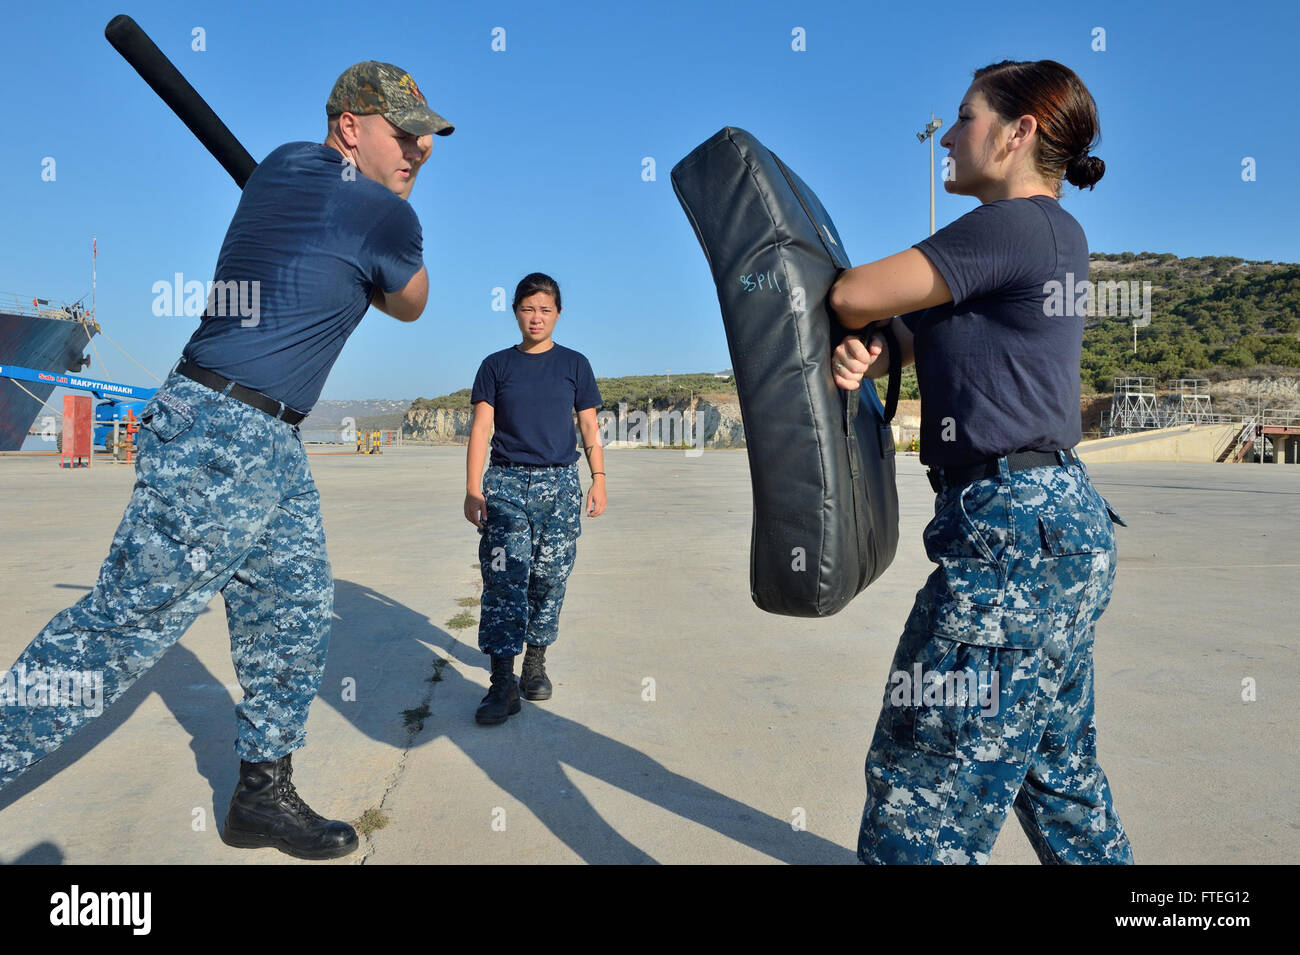 140828-N-IY142-145 SOUDA BAY, Greece (Aug. 28, 2014) Fire Controlman 2nd Class Brian Beddoes demonstrates baton techniques during force protection training with Sailors from the Arleigh Burke-class guided-missile destroyer USS Ross (DDG 71). Ross, forward deployed to Rota, Spain, is conducting naval operations in the U.S. 6th Fleet area of operations in support of U.S. national security interests in Europe. (U.S. Navy photo by Mass Communication Specialist 2nd Class John Herman/Released) Stock Photo